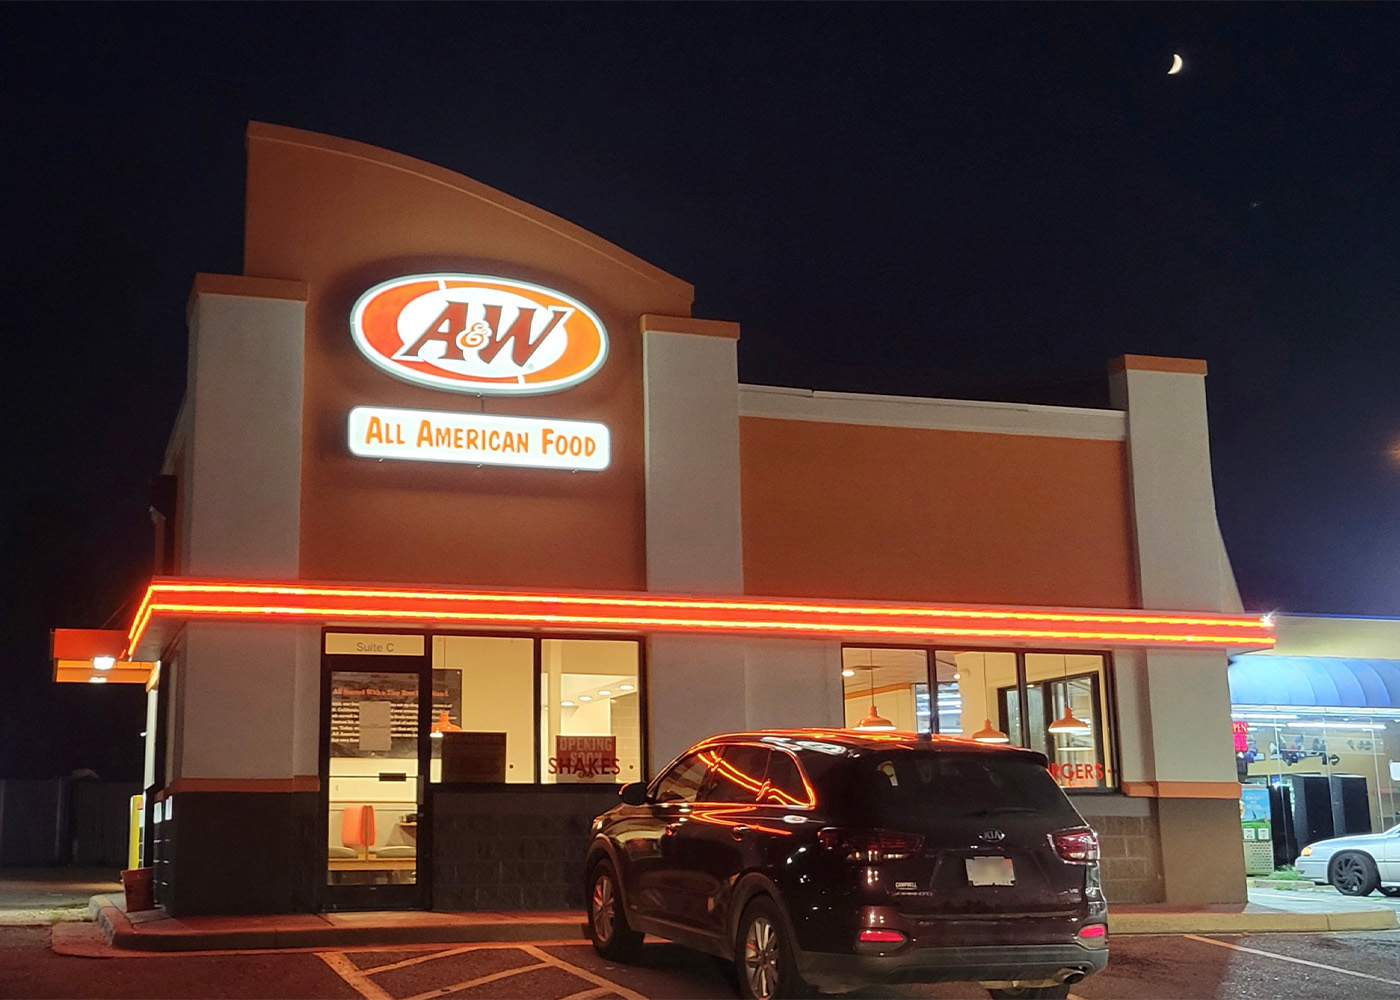 Exterior photo of an A&W Restaurant convenience store location at nighttime. A van is parked at the front of the building.